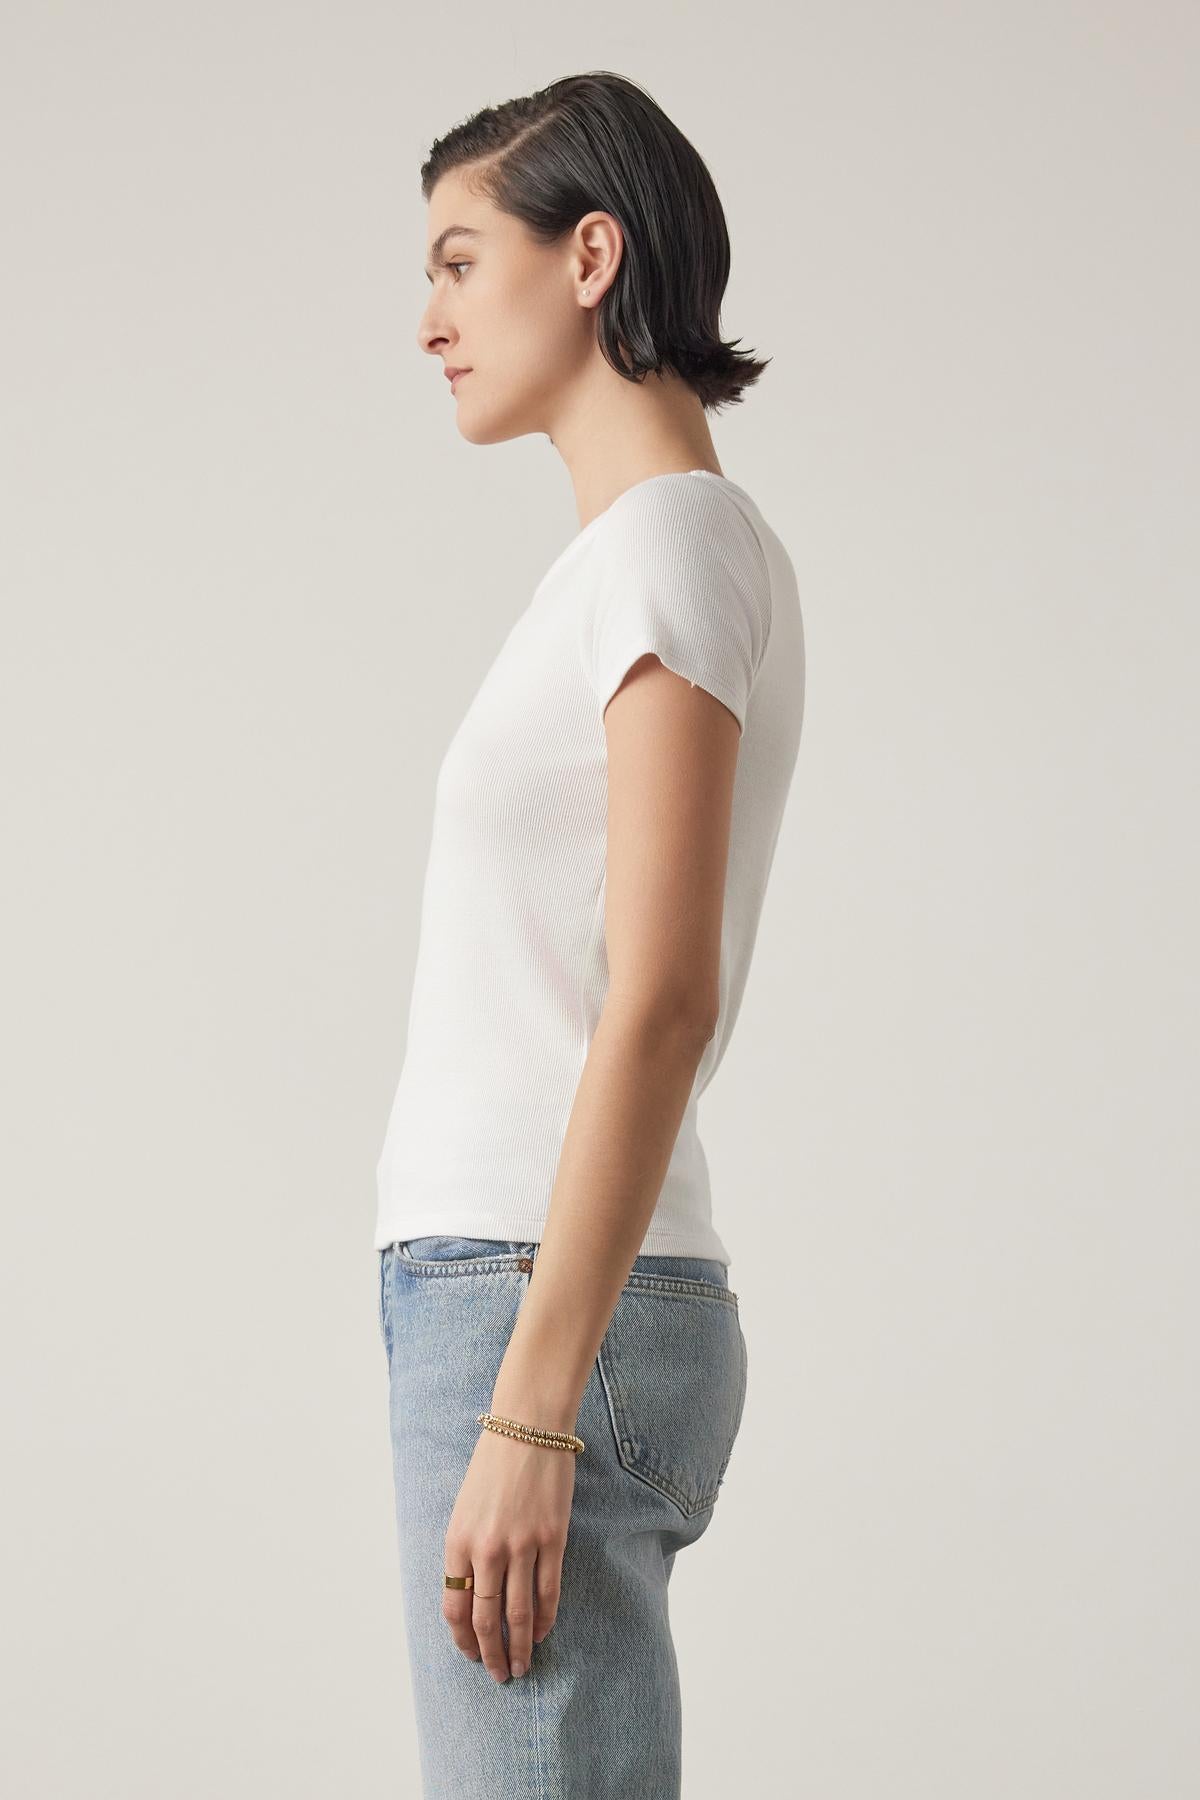 Side profile of a woman with short hair wearing a white BEDFORD TEE by Velvet by Jenny Graham with a crew neckline and jeans, standing against a light backdrop.-36753616797889